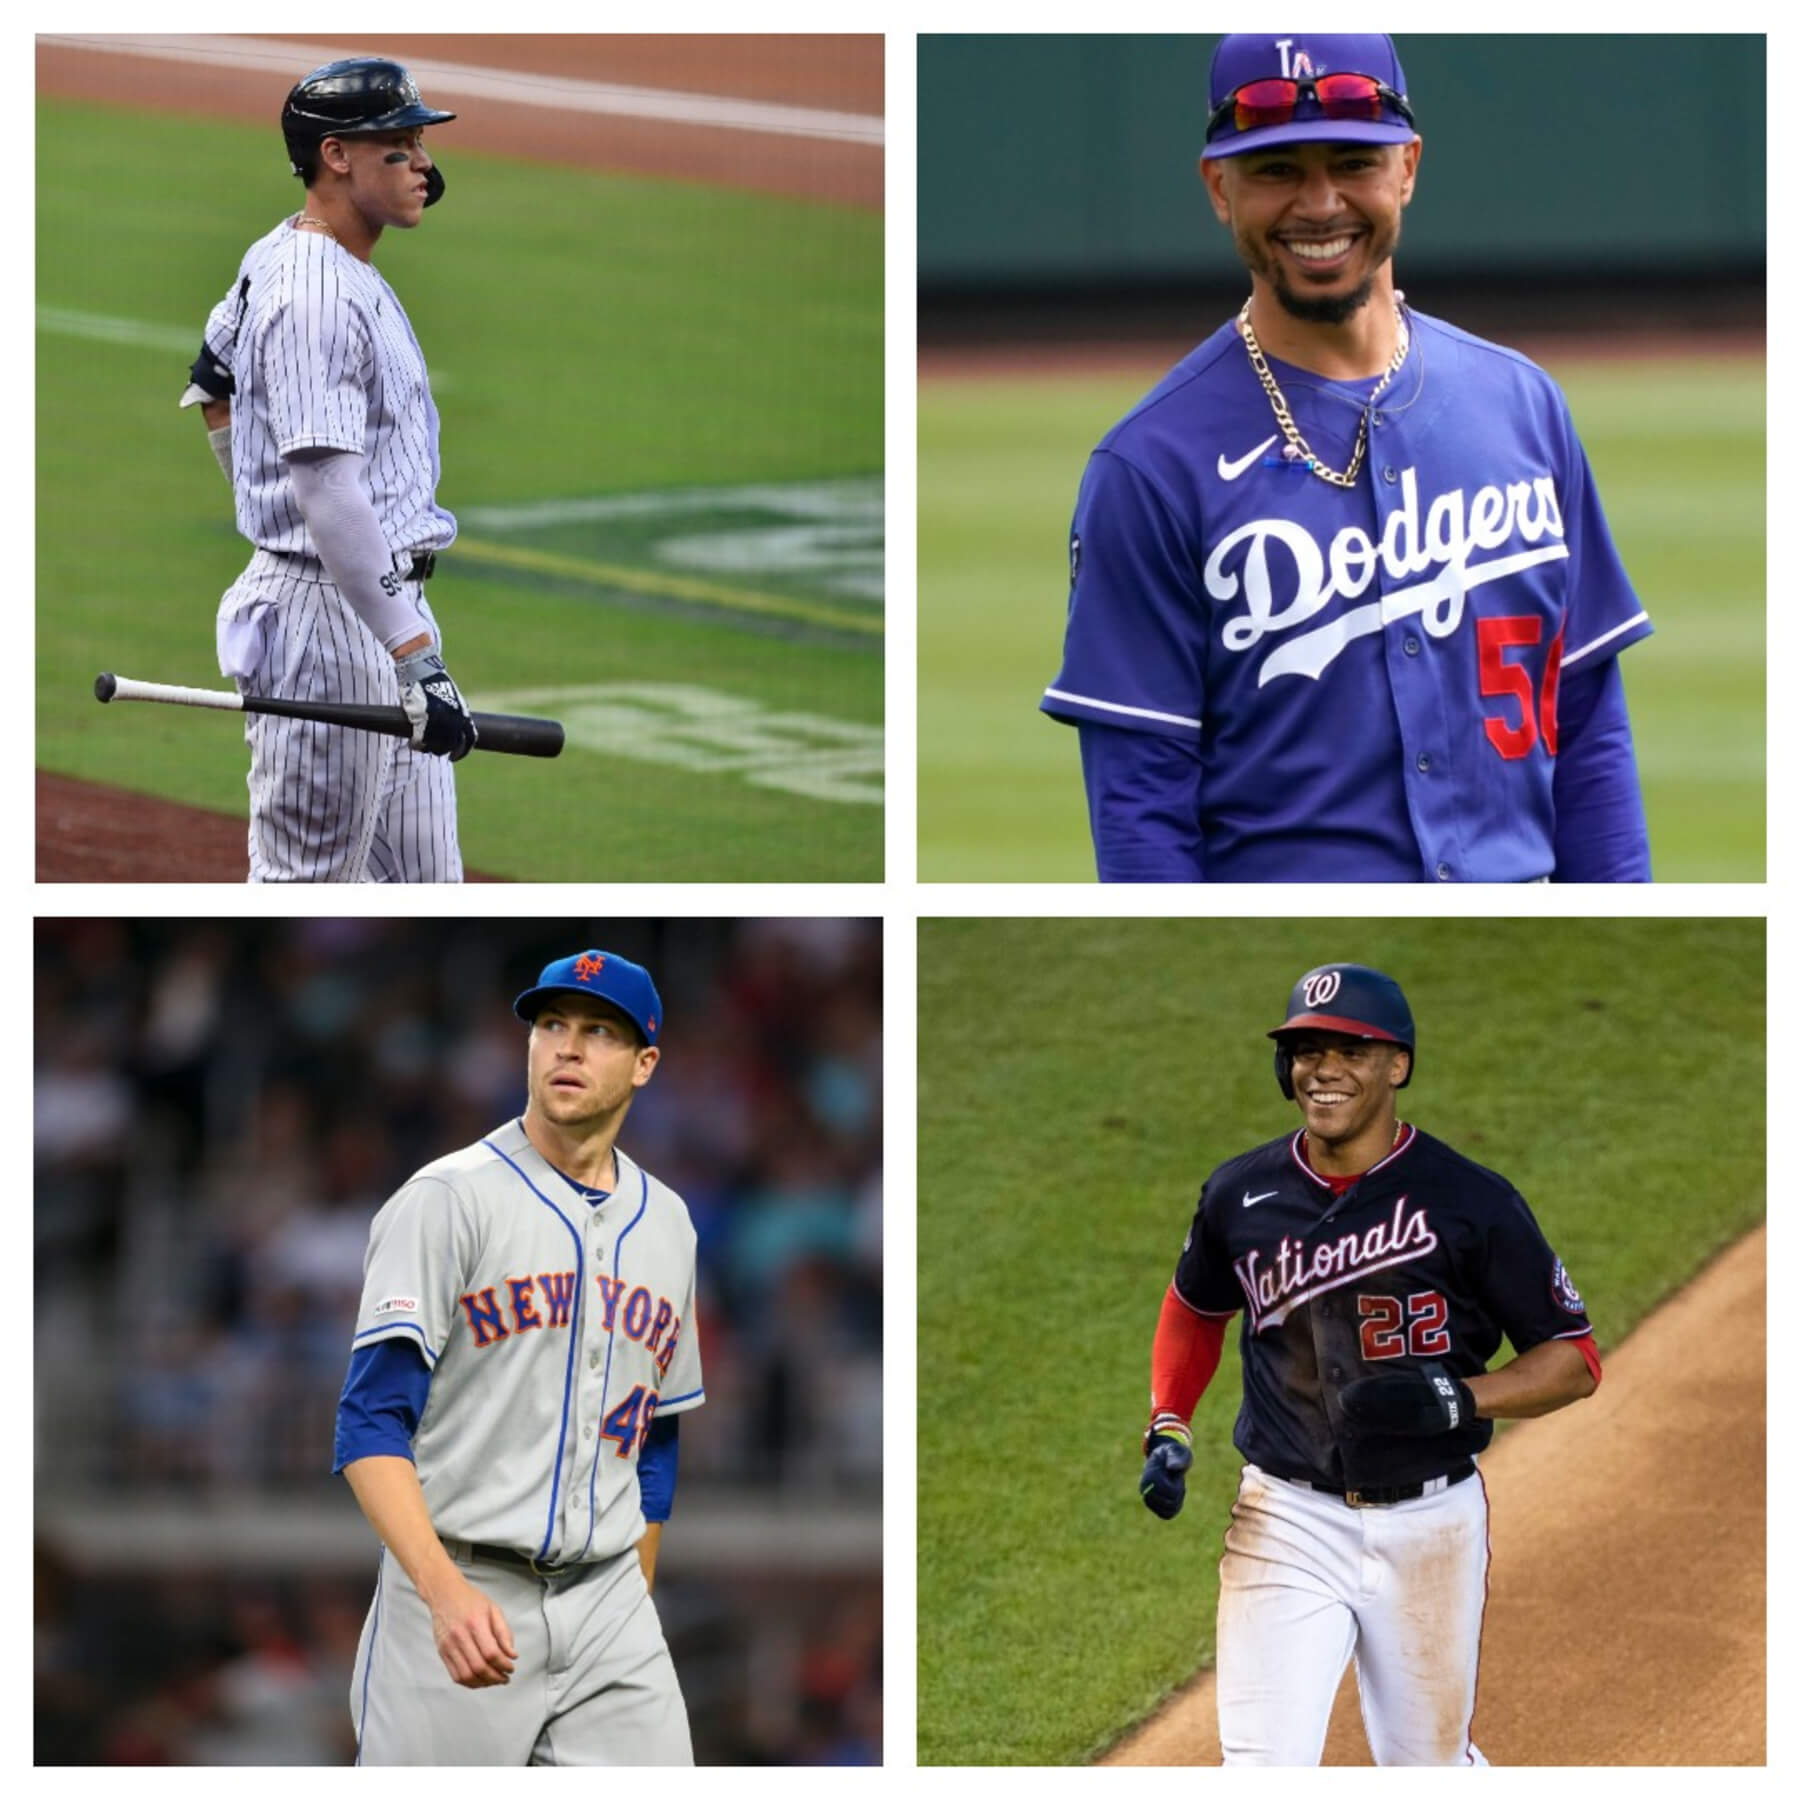 MLB awards 2021 schedule: Dodgers considered for MVP, Cy Young